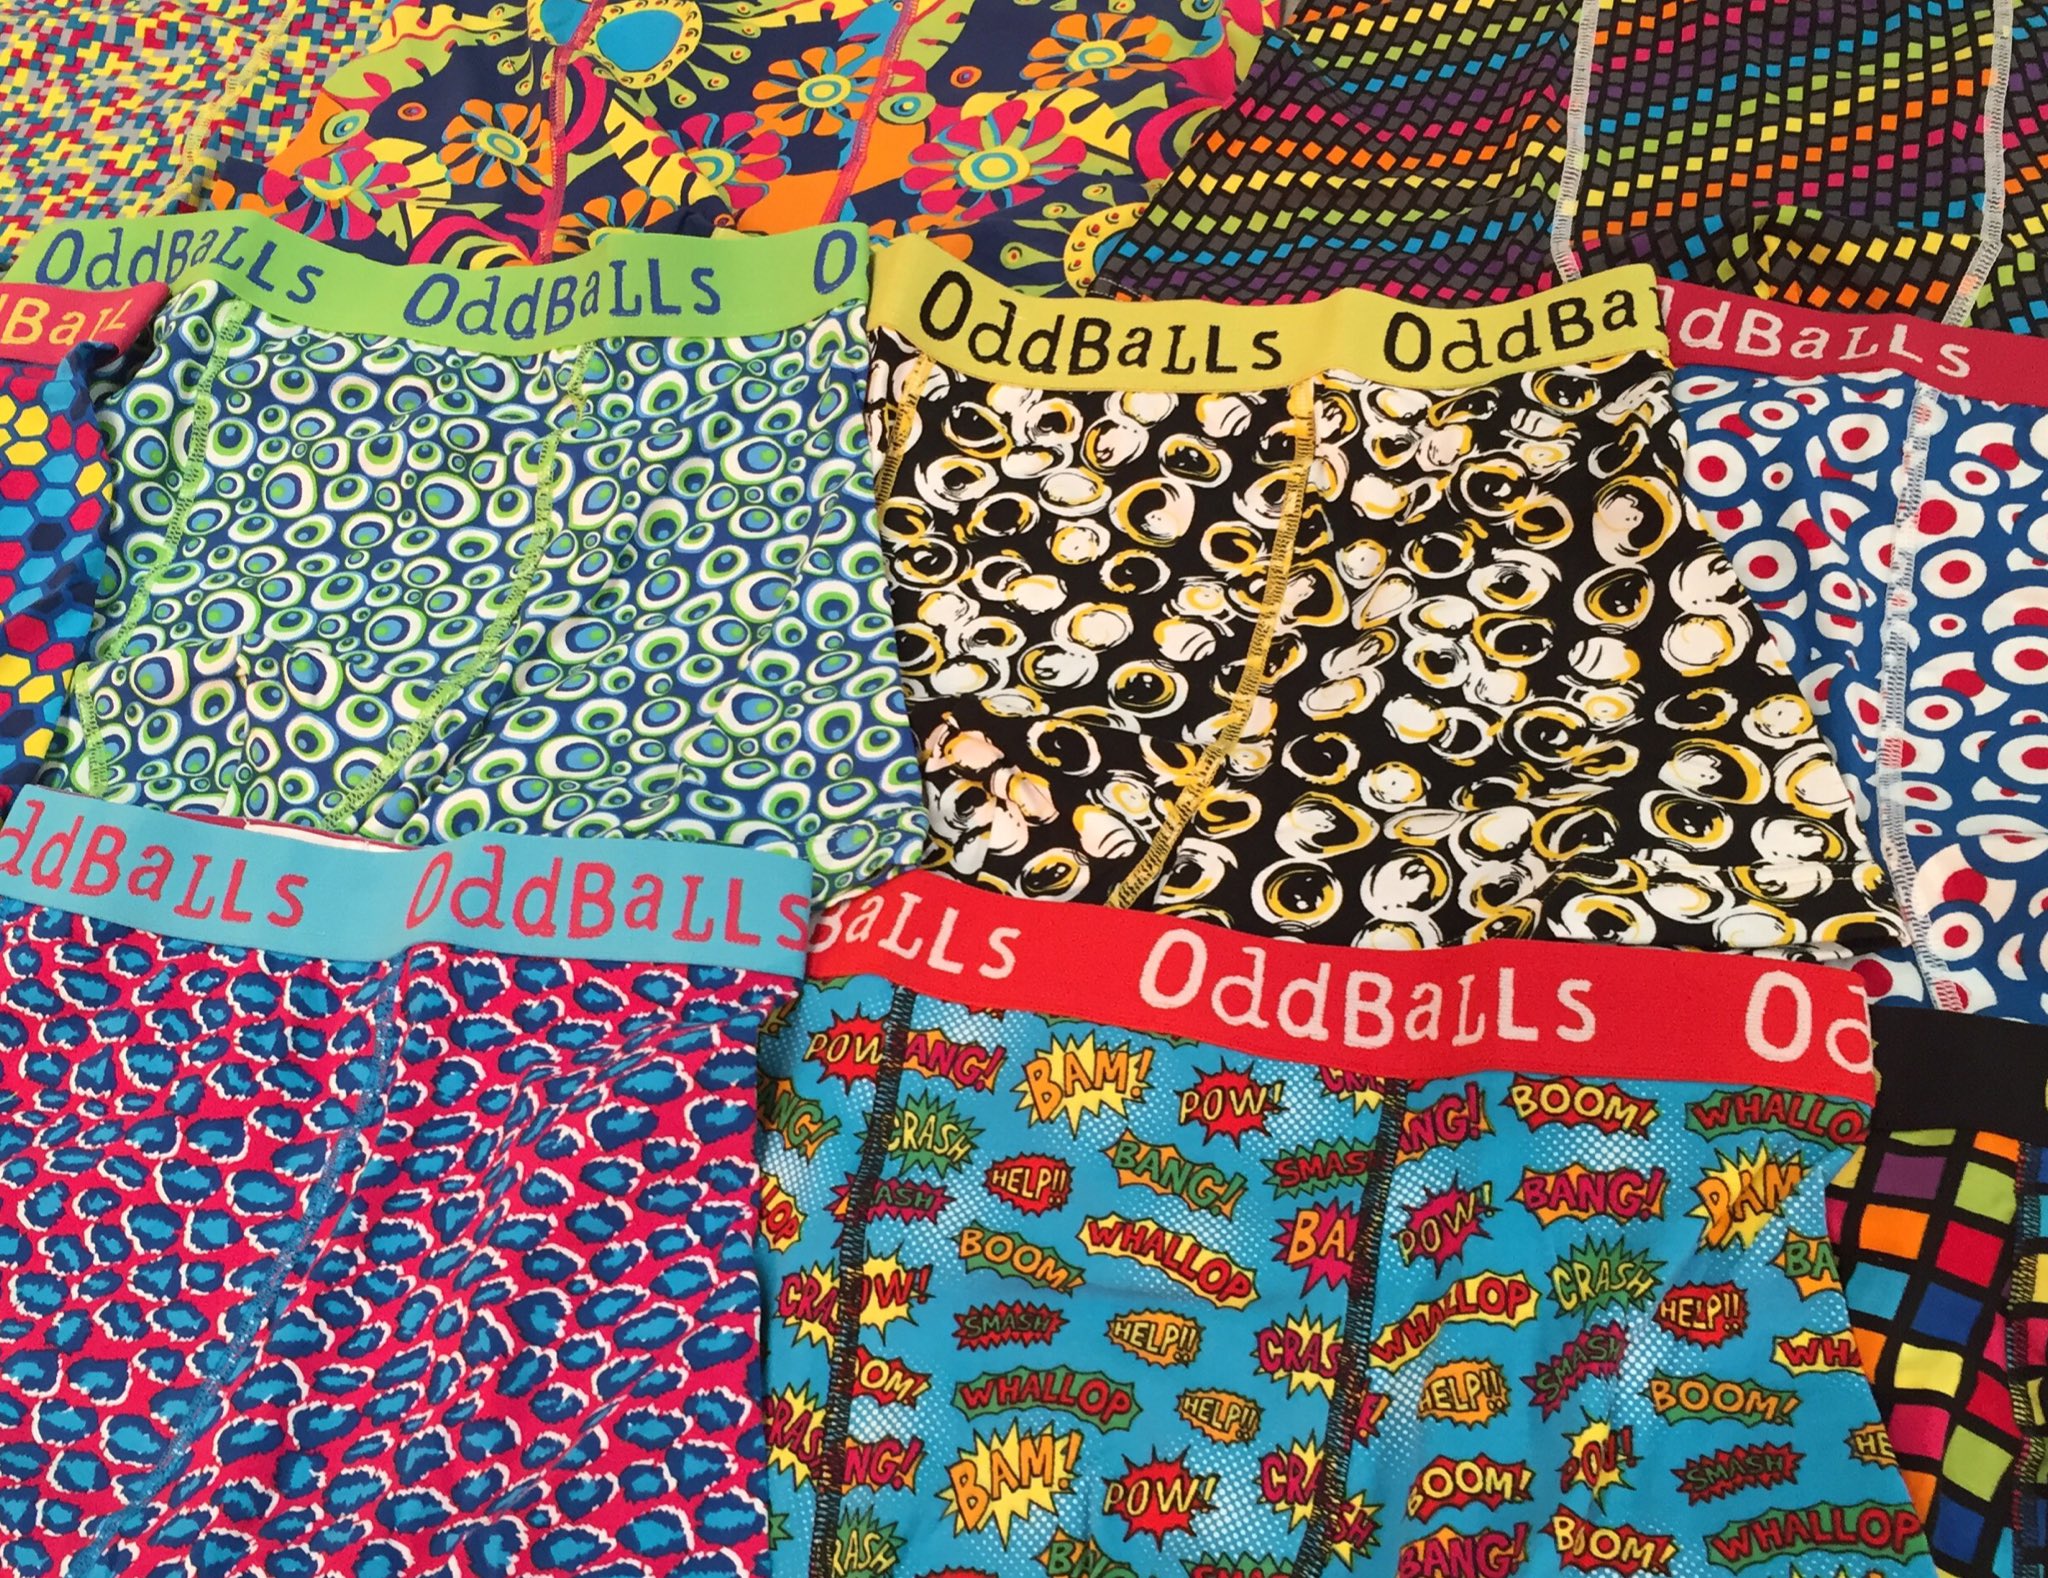 OddBalls on X: OddBalls are THE most comfortable underwear in the world.   RT if you agree - 1 towel to win!   / X